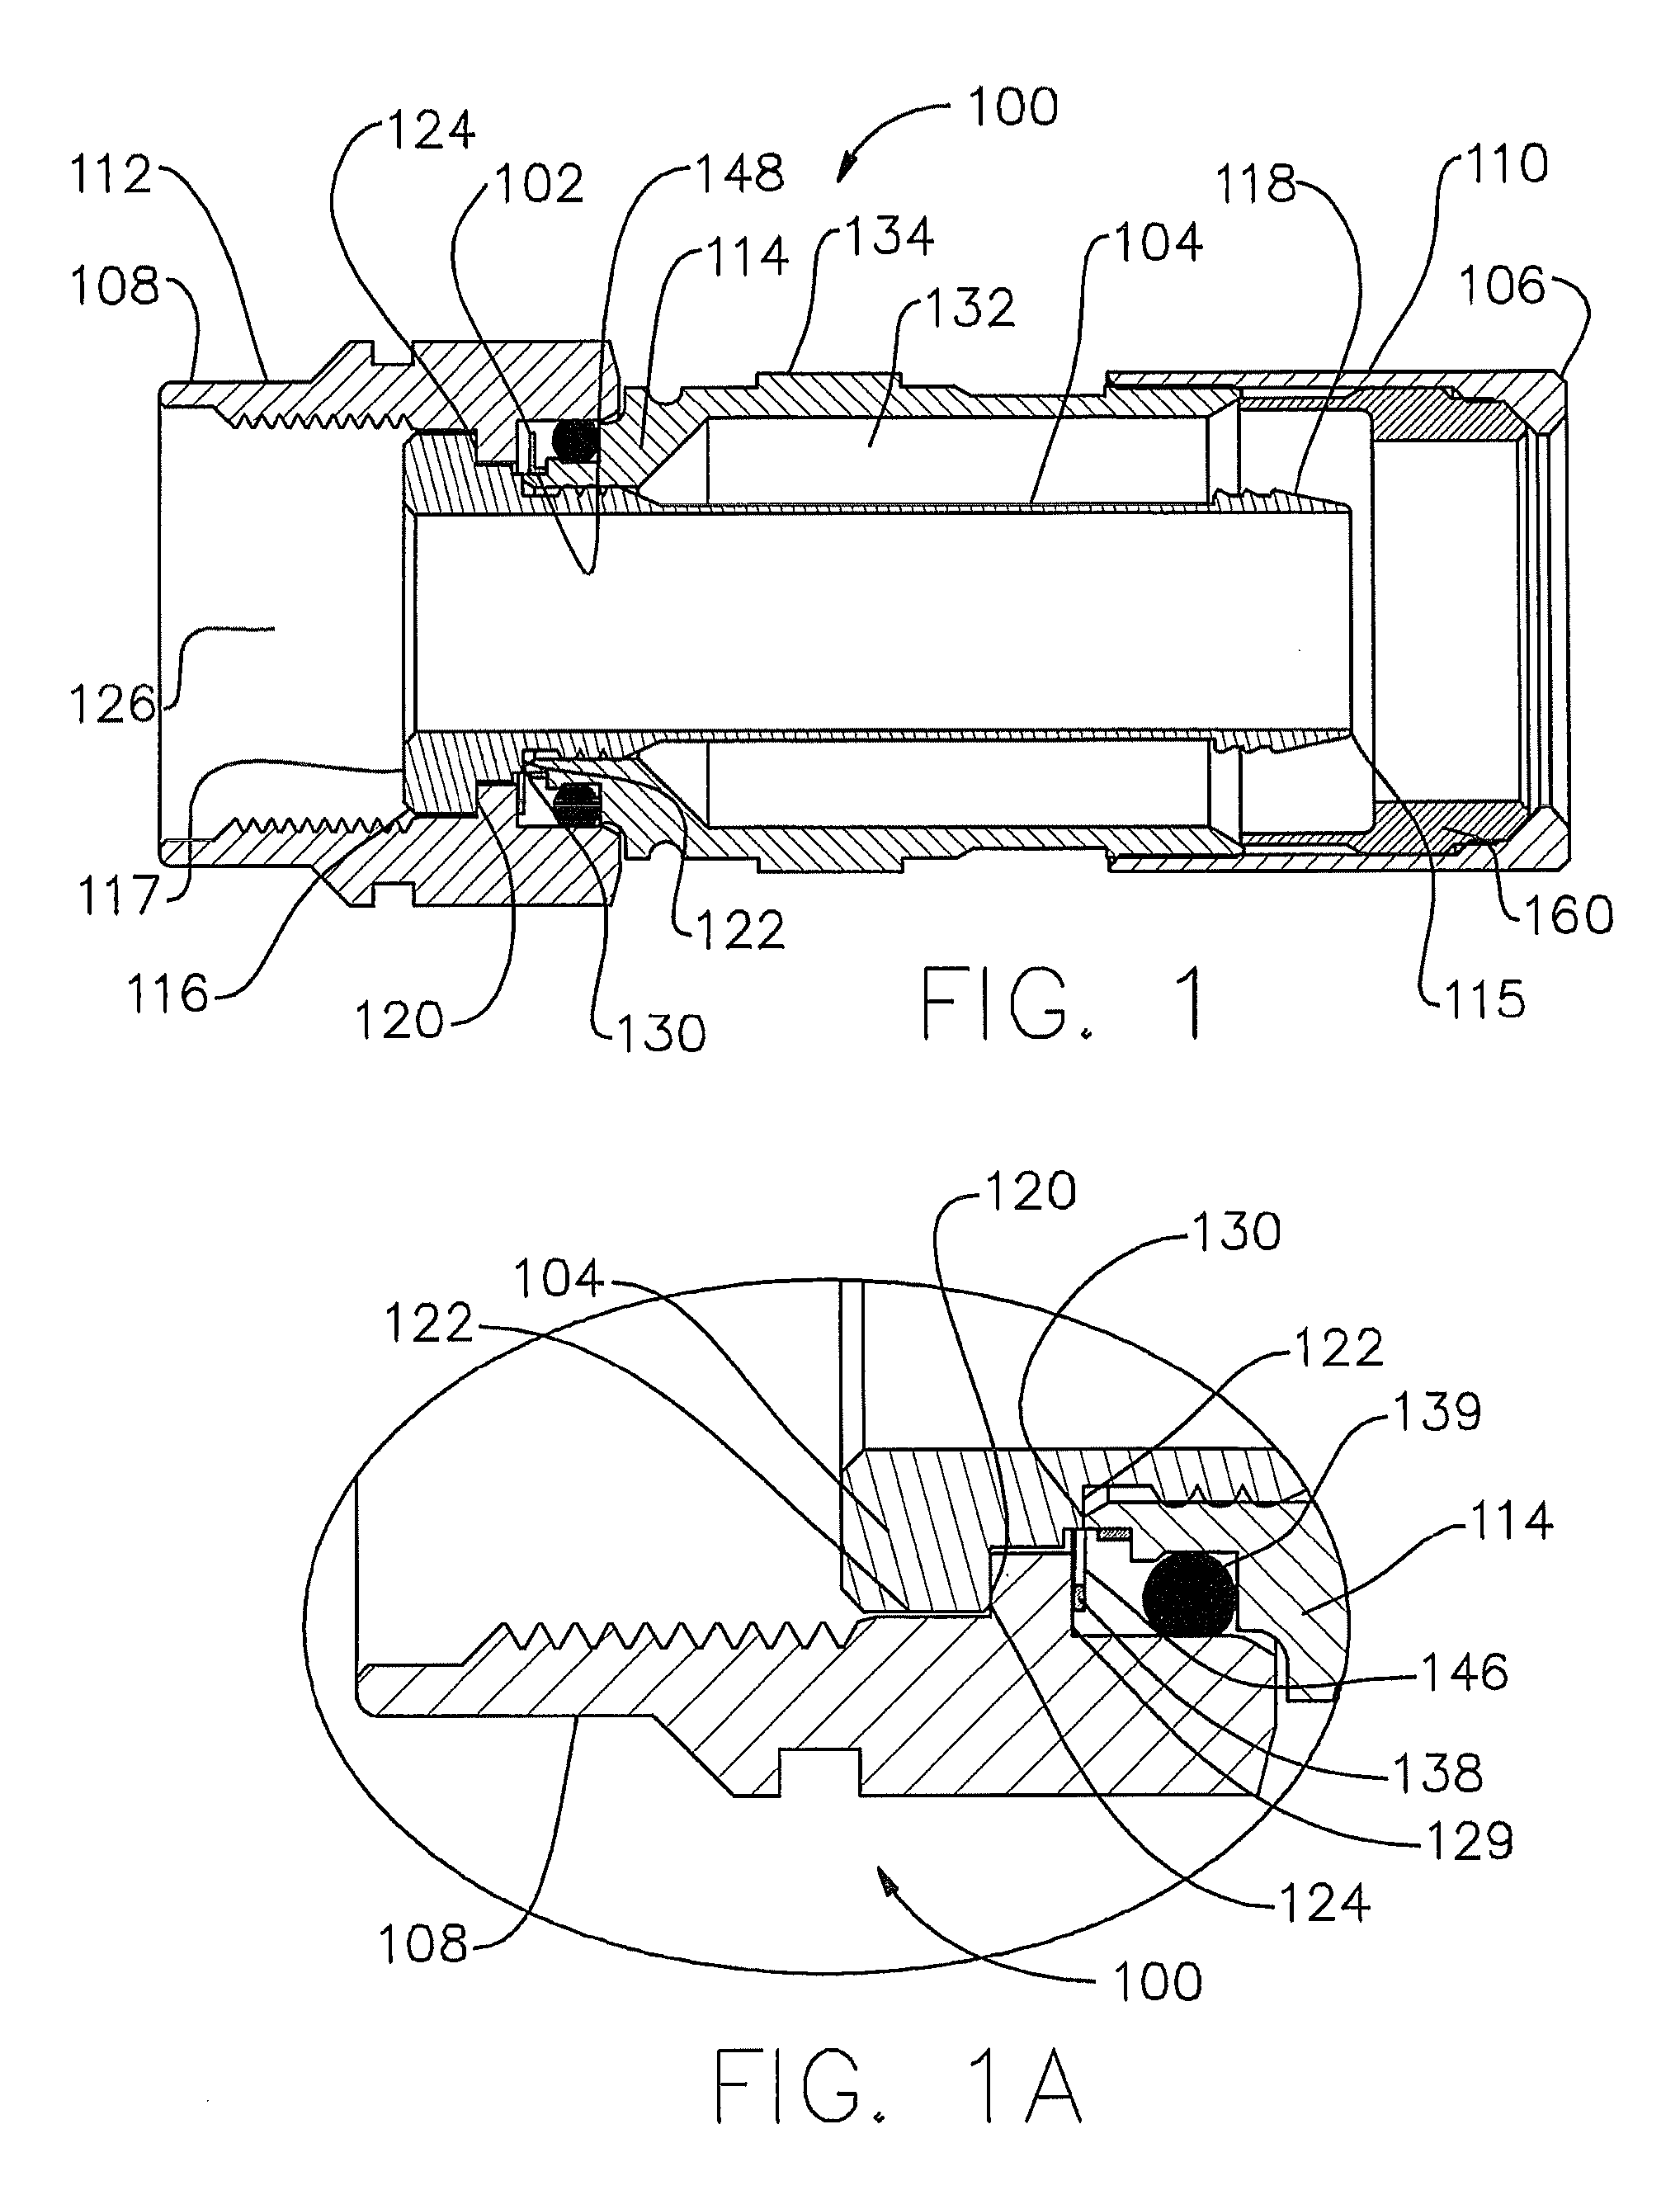 Coaxial cable connector with radio frequency interference and grounding shield